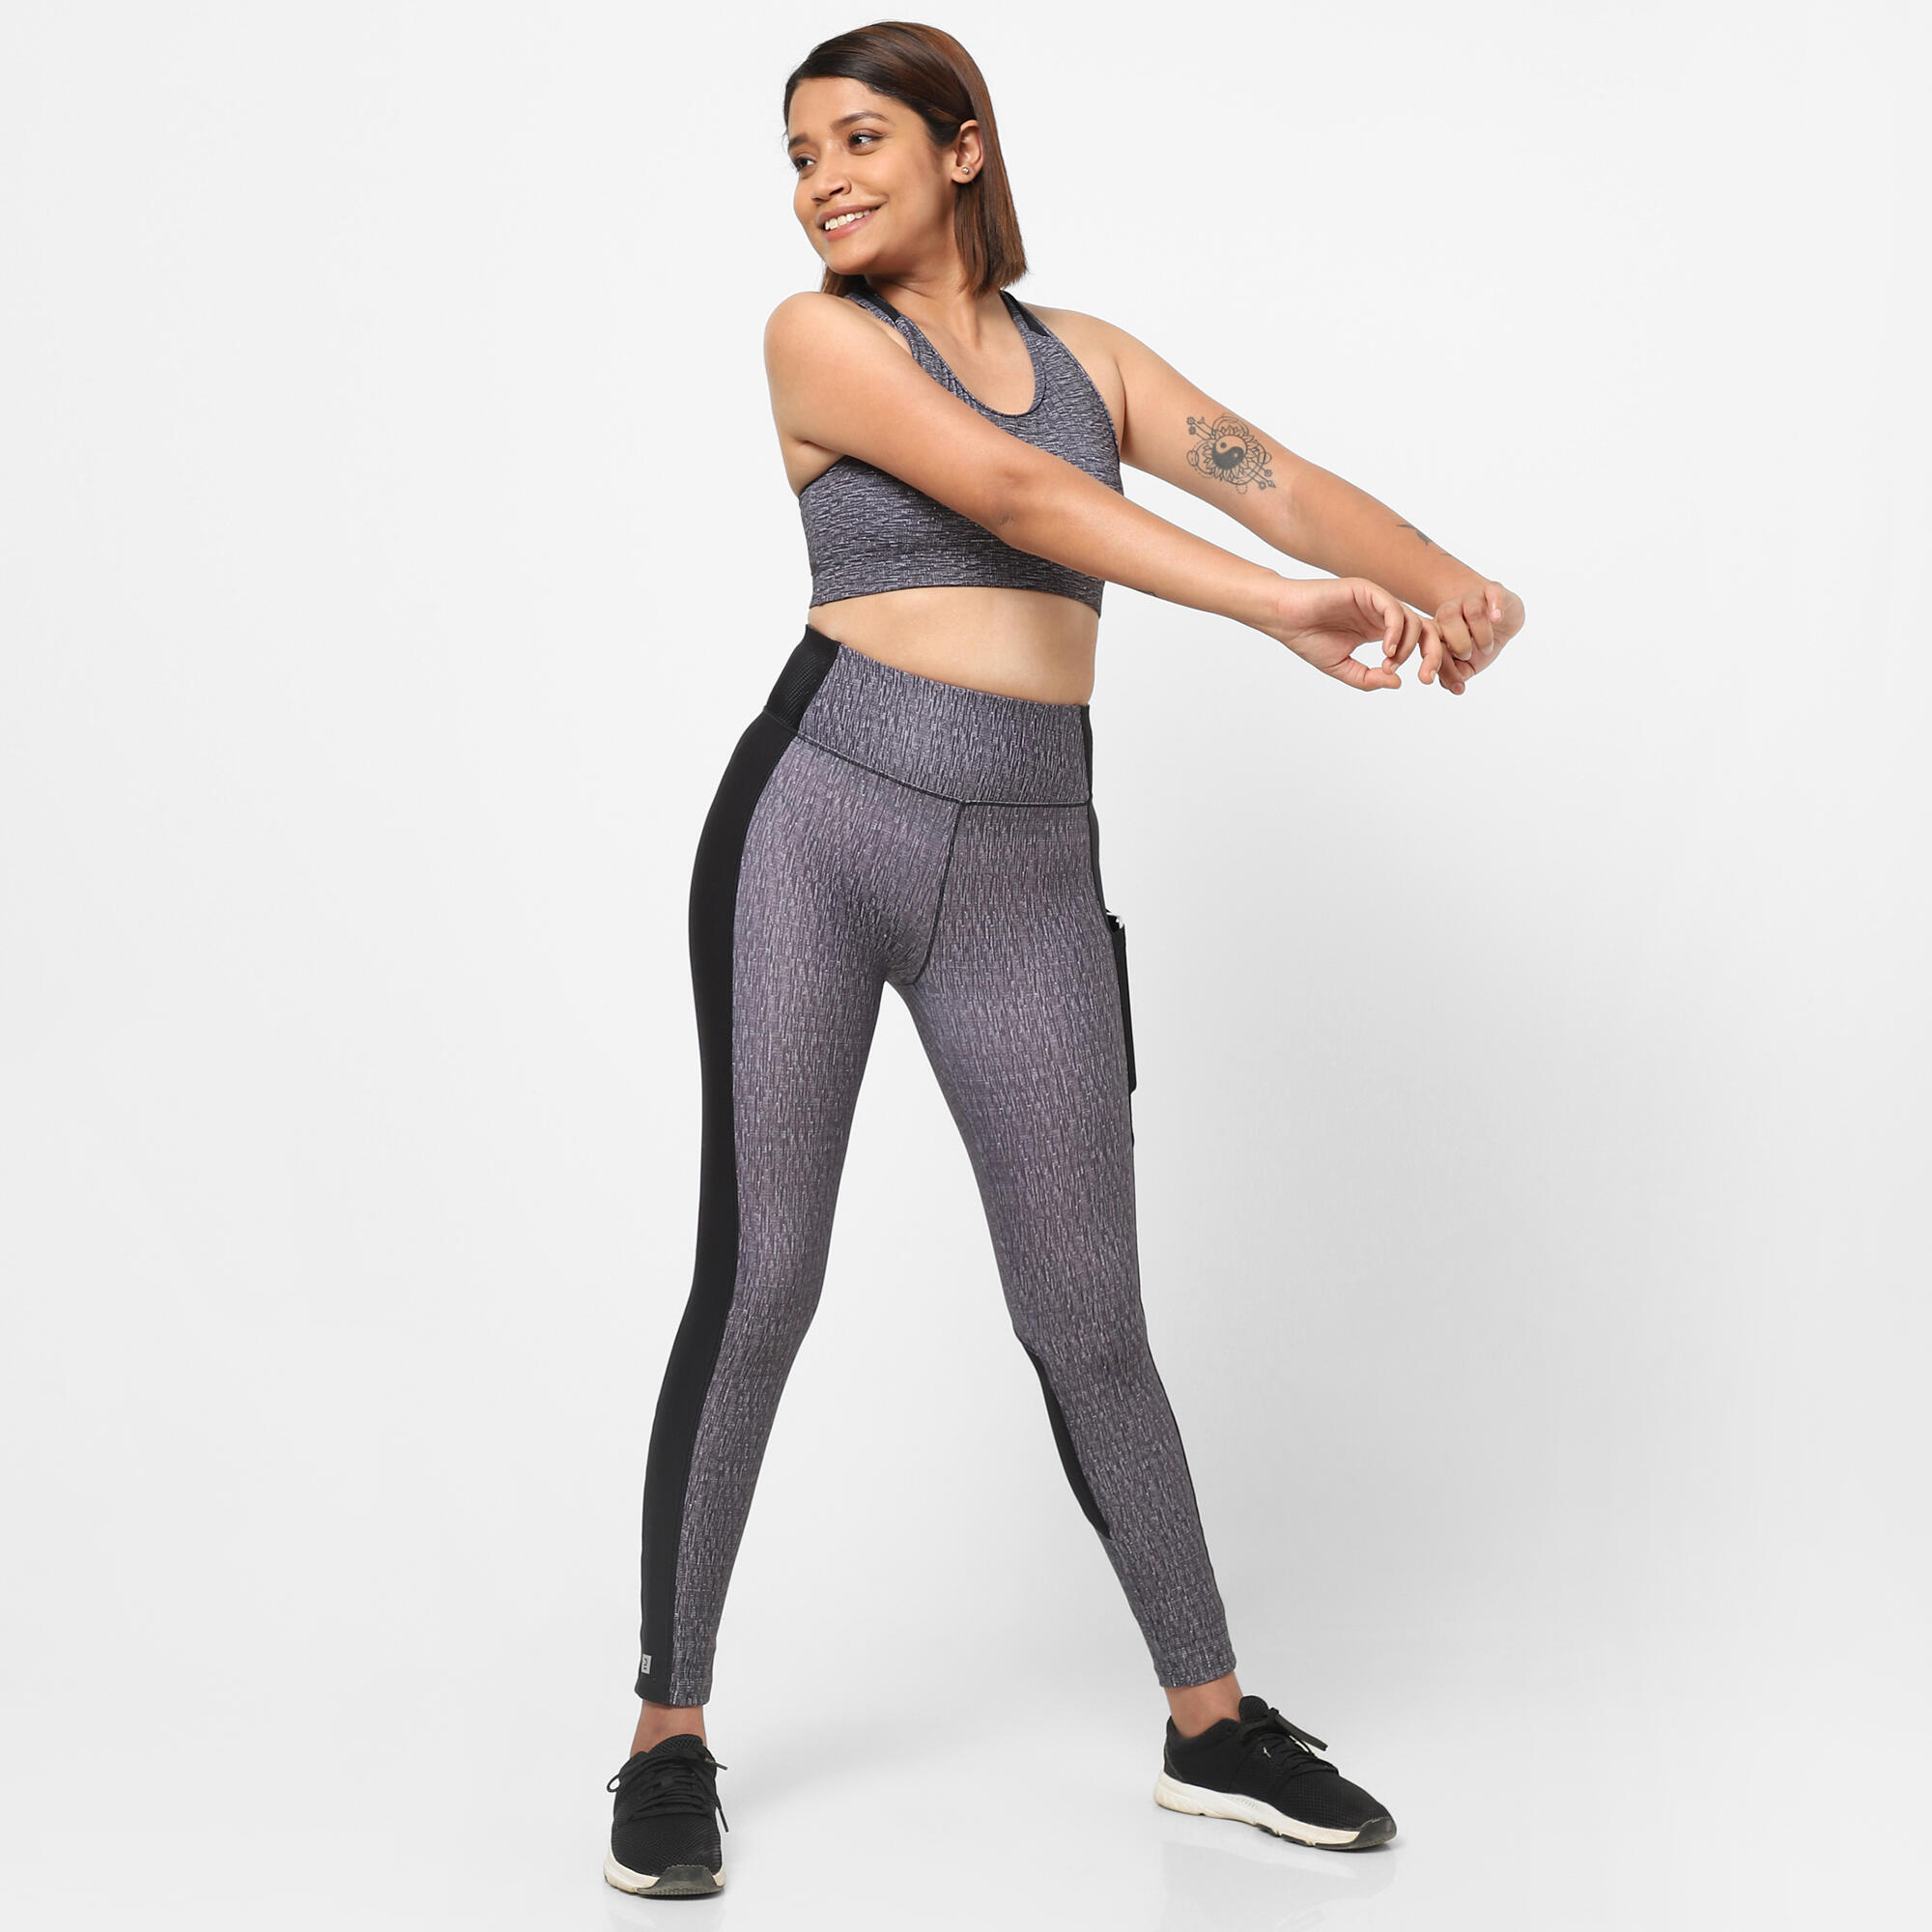 Exercise pants for women: Embracing Comfort and Style缩略图